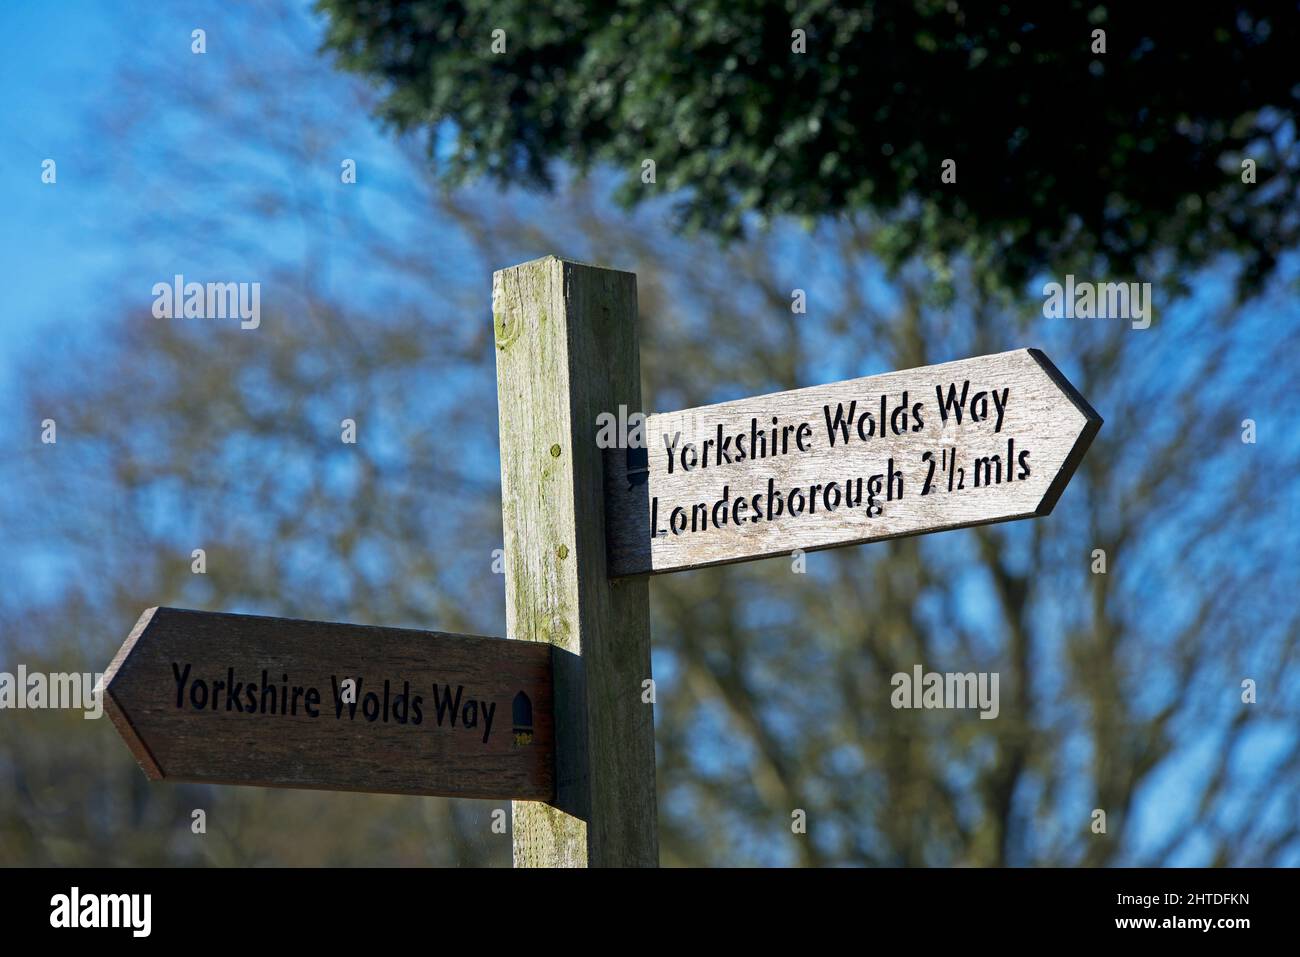 Fingerpost direction sign for the Yorkshire Wolds Way, East Yorkshire, England UK Stock Photo